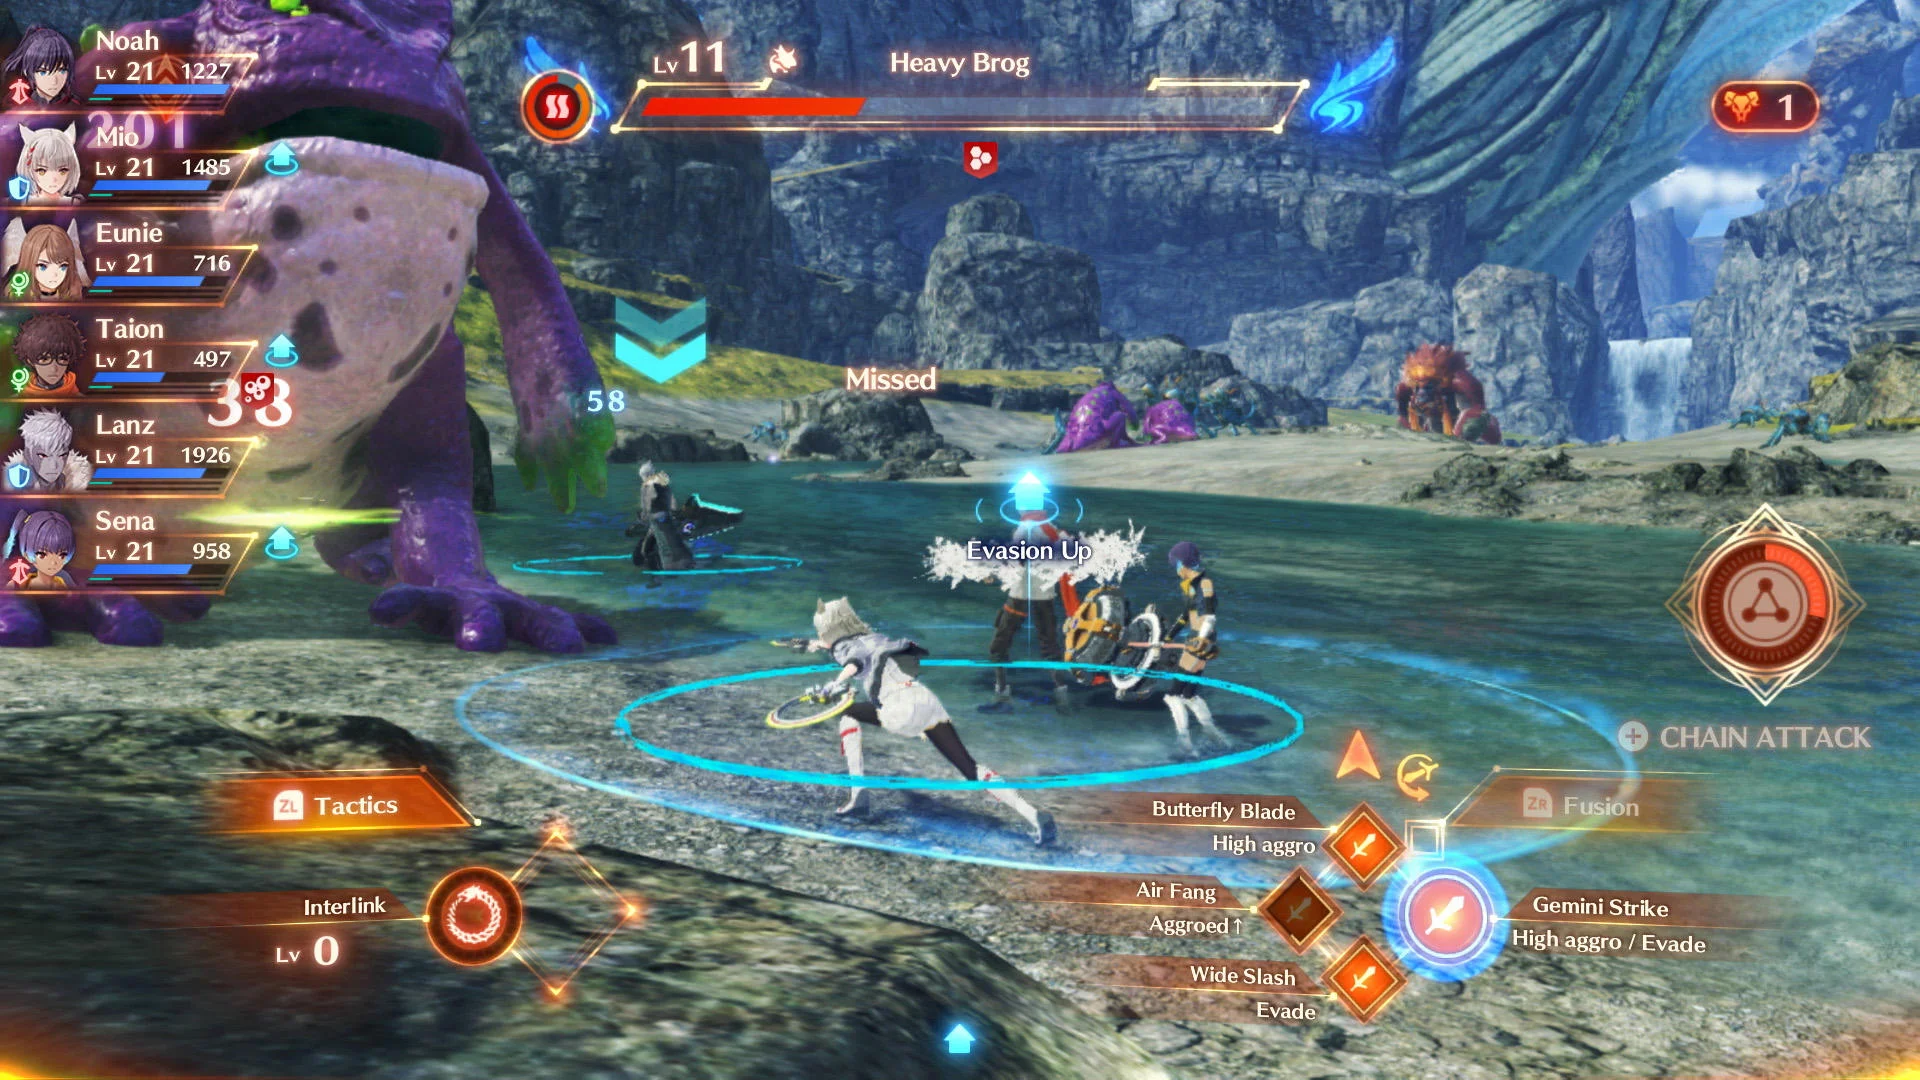 Xenoblade Chronicles 3 (for Nintendo Switch) Review